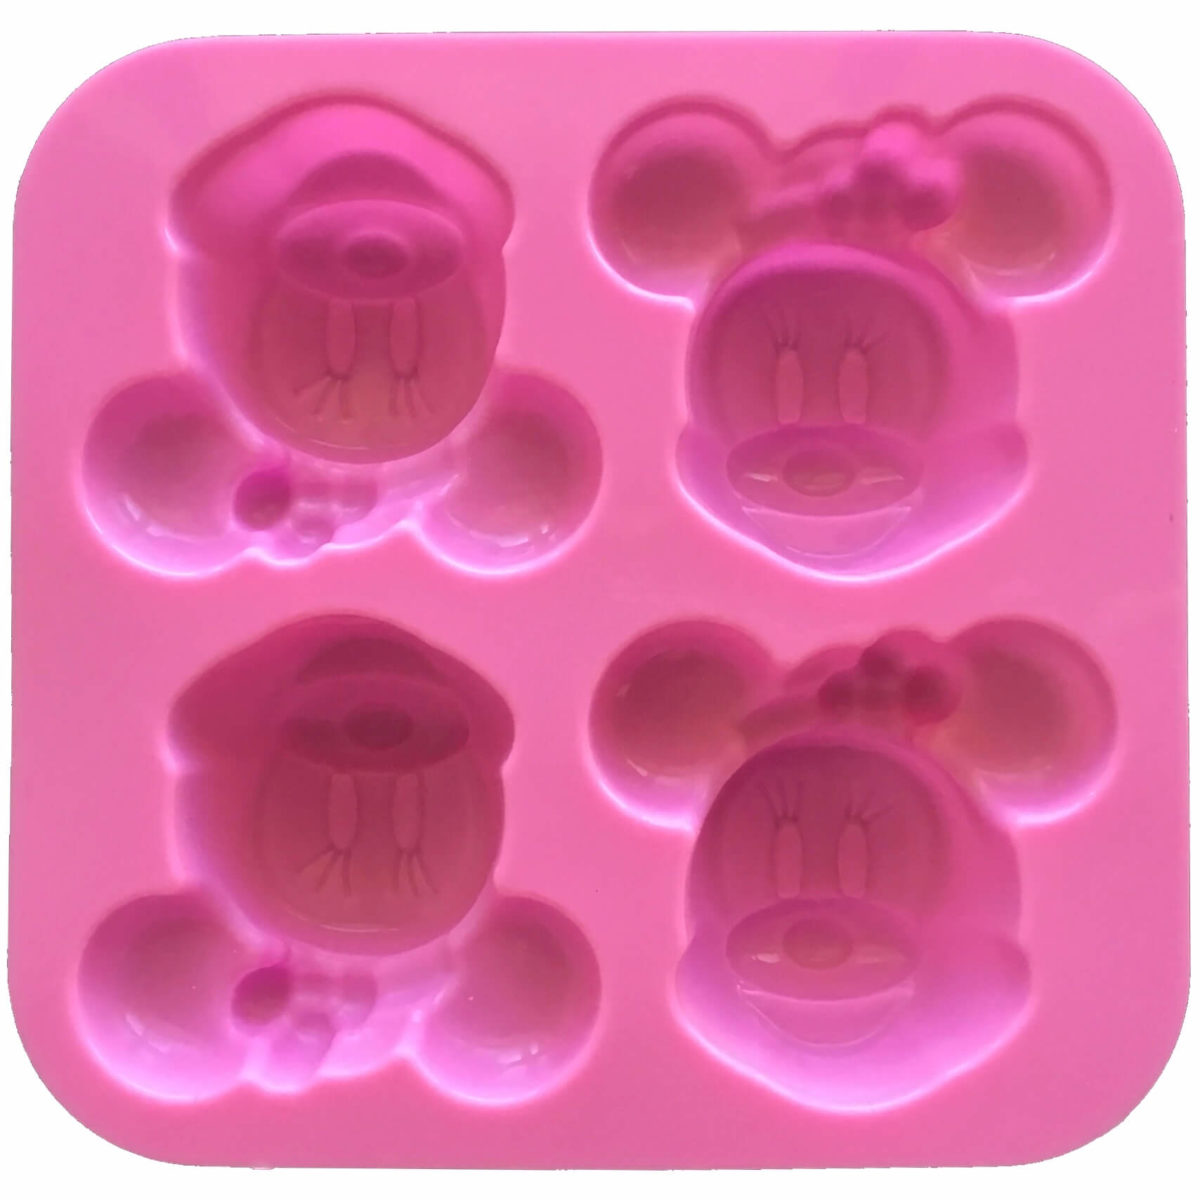 back of pink four cavity silicone mould with identical minnie mouse cavites showing mould cavity details